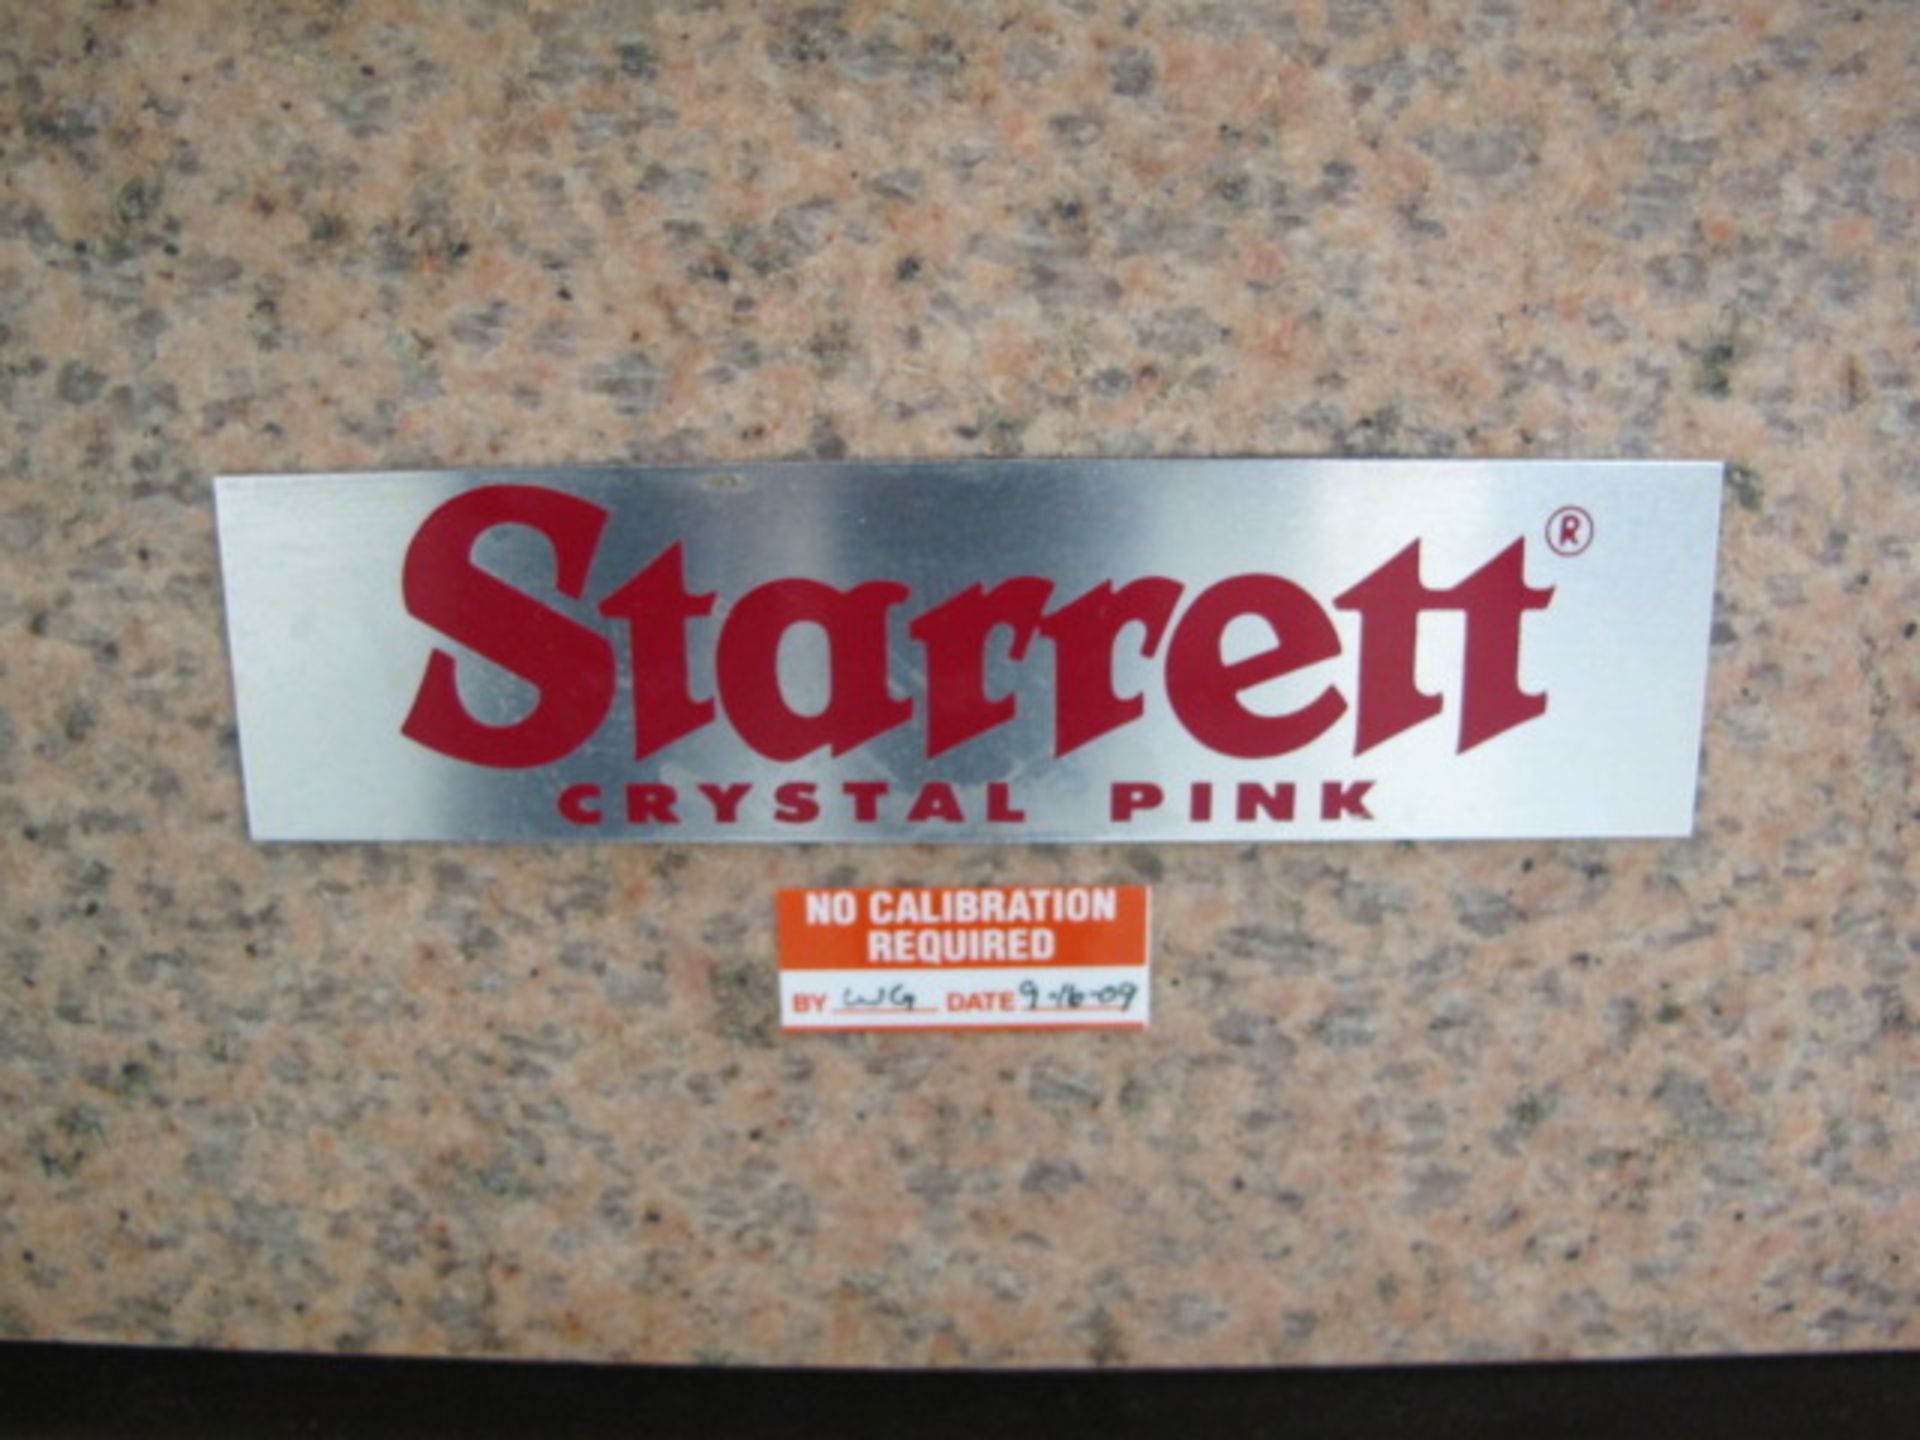 Starrett Crystal Pink 24” x 24” x 6 ½” Grade “A” Granite Surface Plate w/ Roller Stand - Image 2 of 2